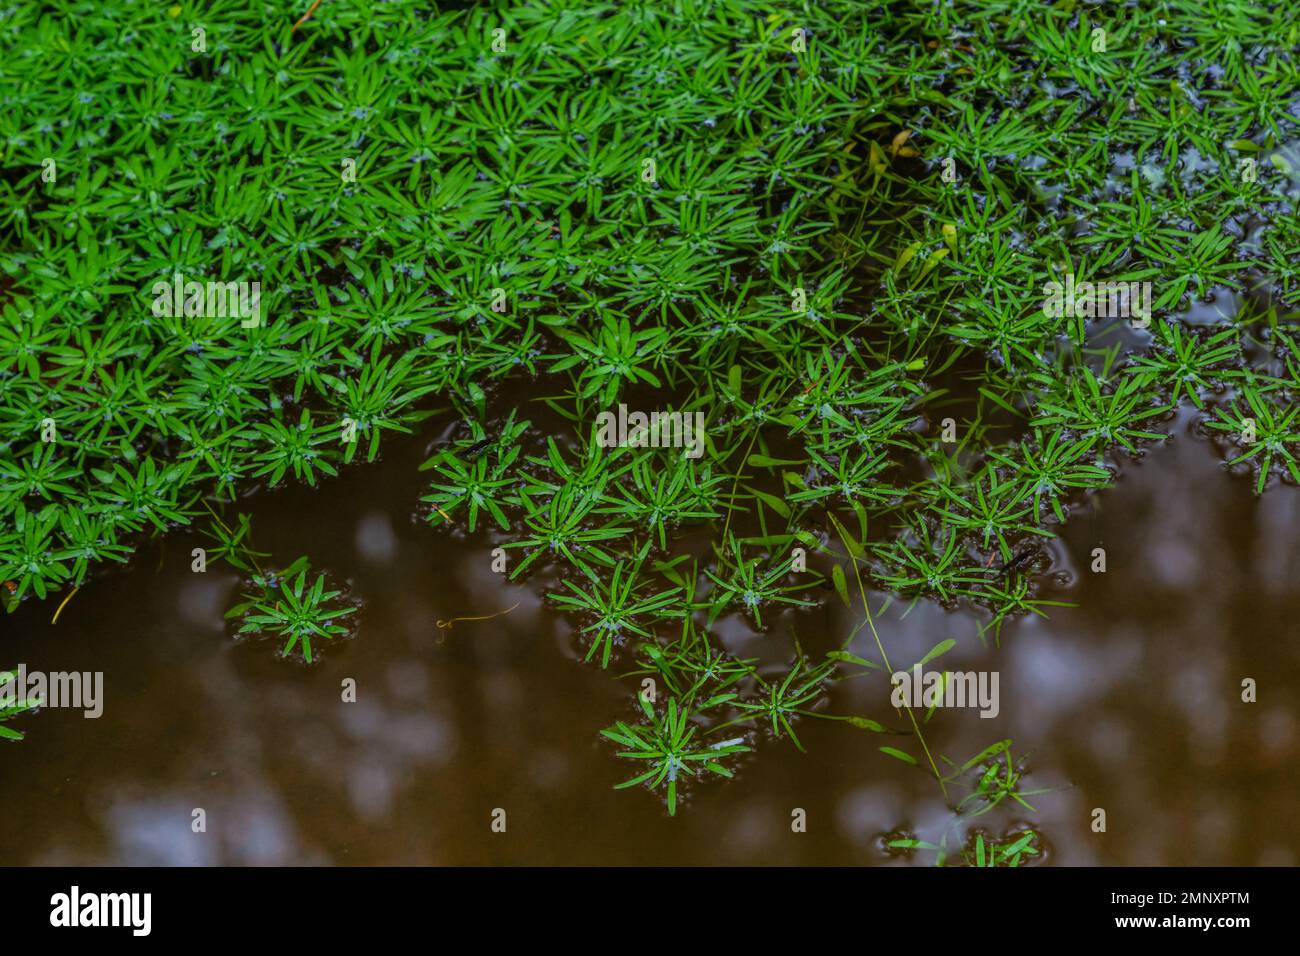 Callitriche palustris a marsh grass. underwater plants with floating rosettes or growing on wet mud. Stock Photo